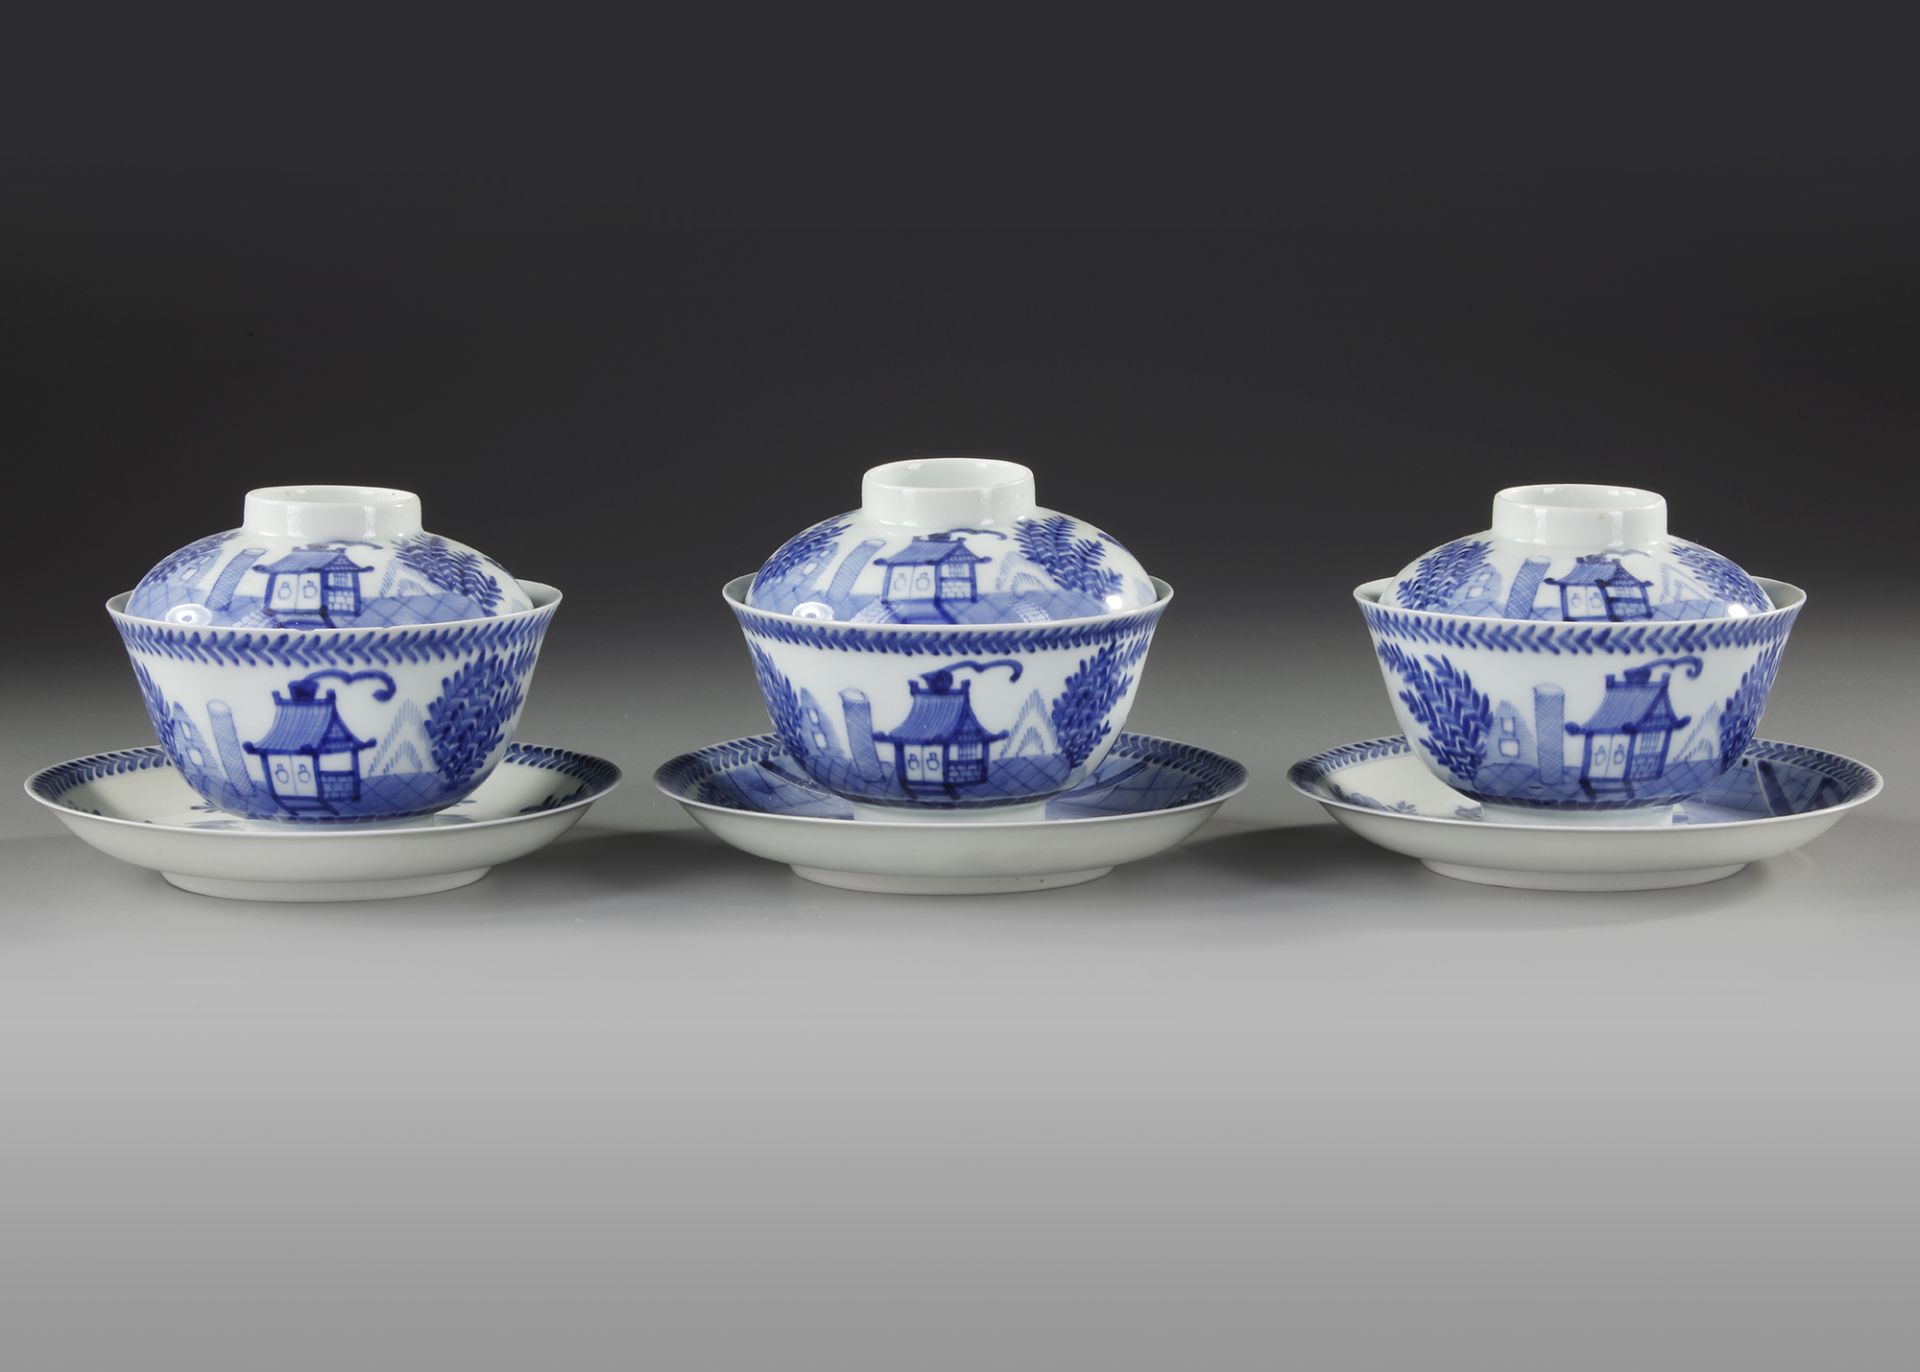 THREE CHINESE BLUE AND WHITE 'CUCKOO IN THE HOUSE' BOWL, COVERS AND SAUCERS, 18TH-19TH CENTURY - Image 2 of 4